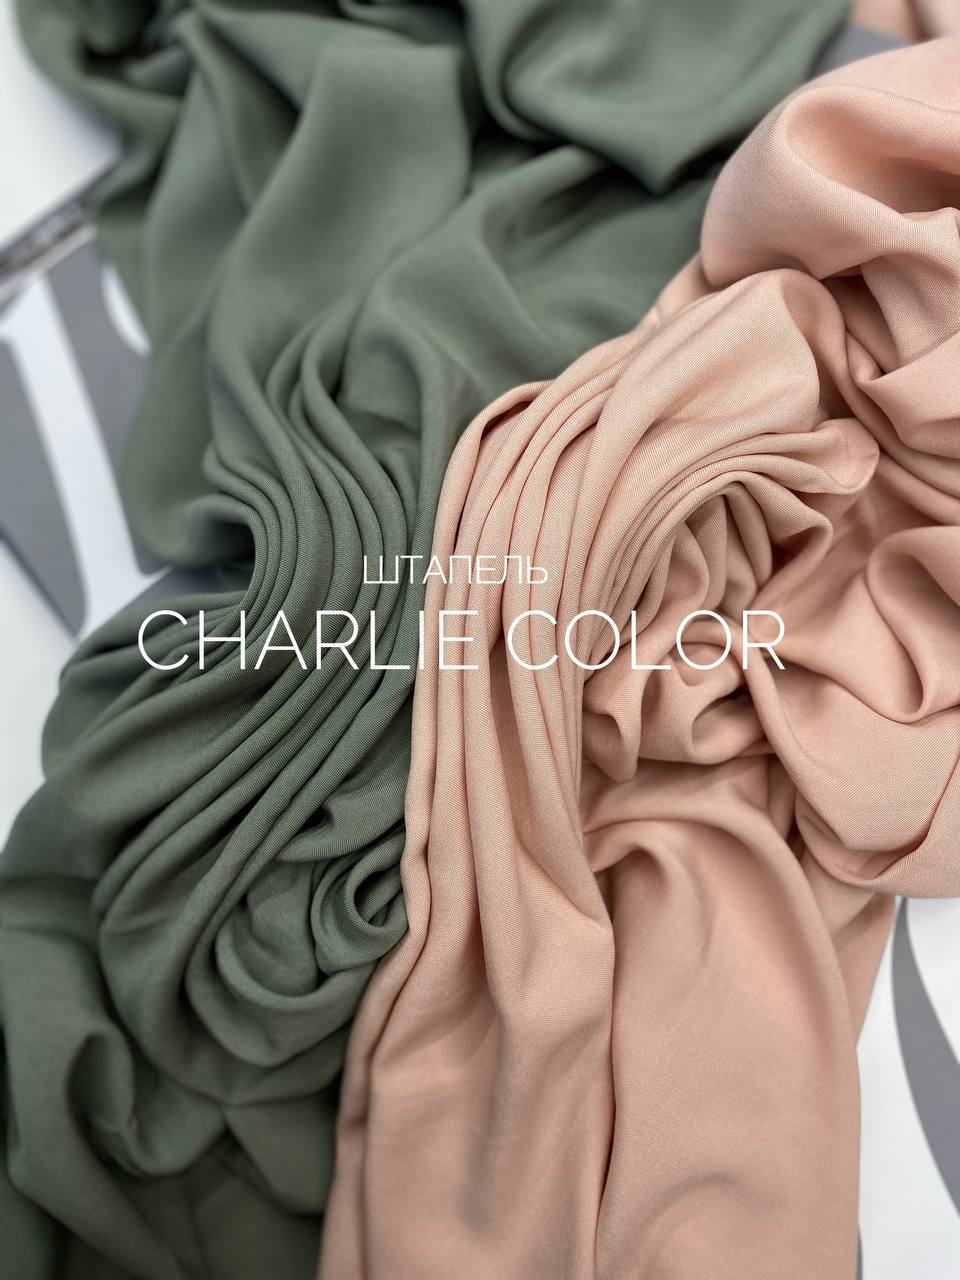 CHARLIE COLOR photo1676443518